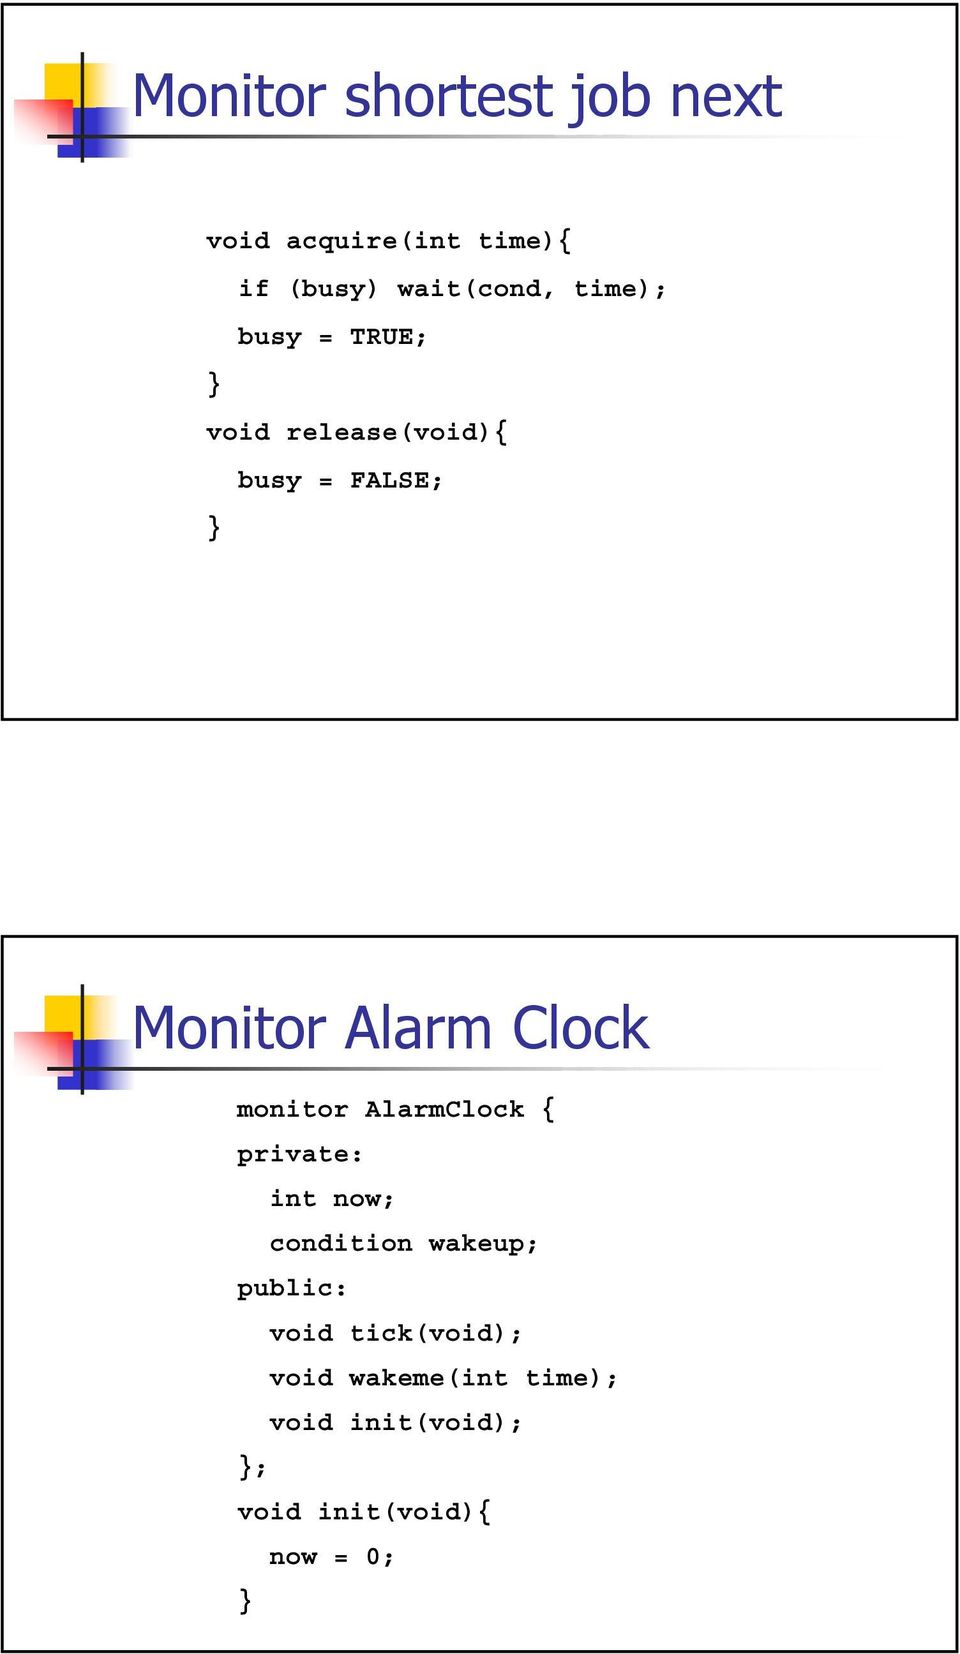 monitor AlarmClock { private: int now; condition wakeup; public: void